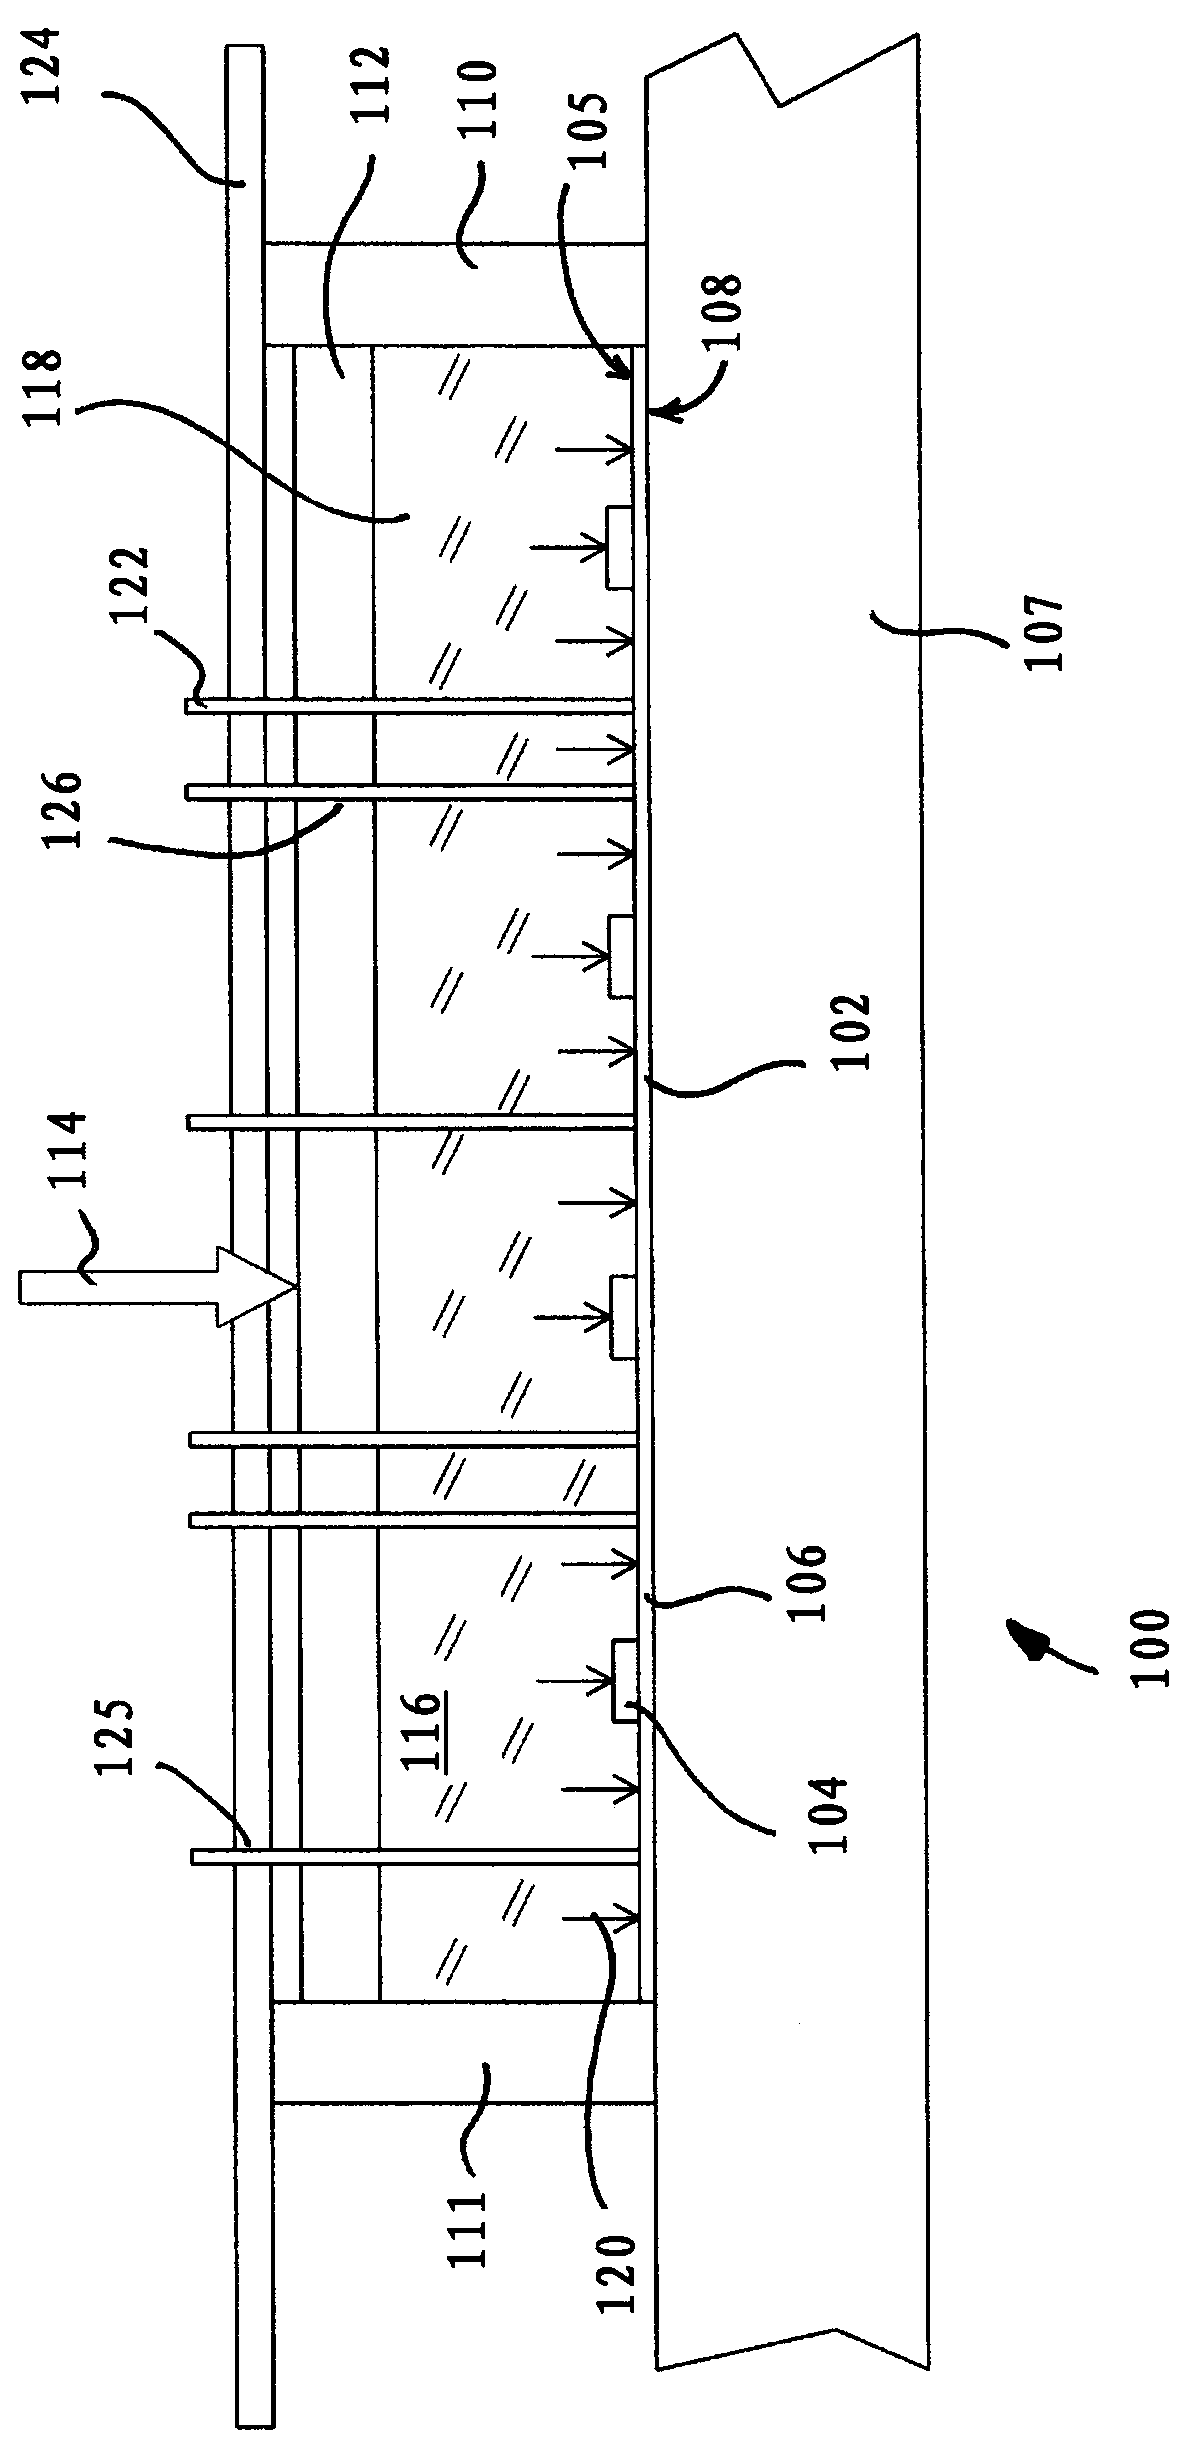 Semiconductor circuit arrangement and assembly method with pressurized gel